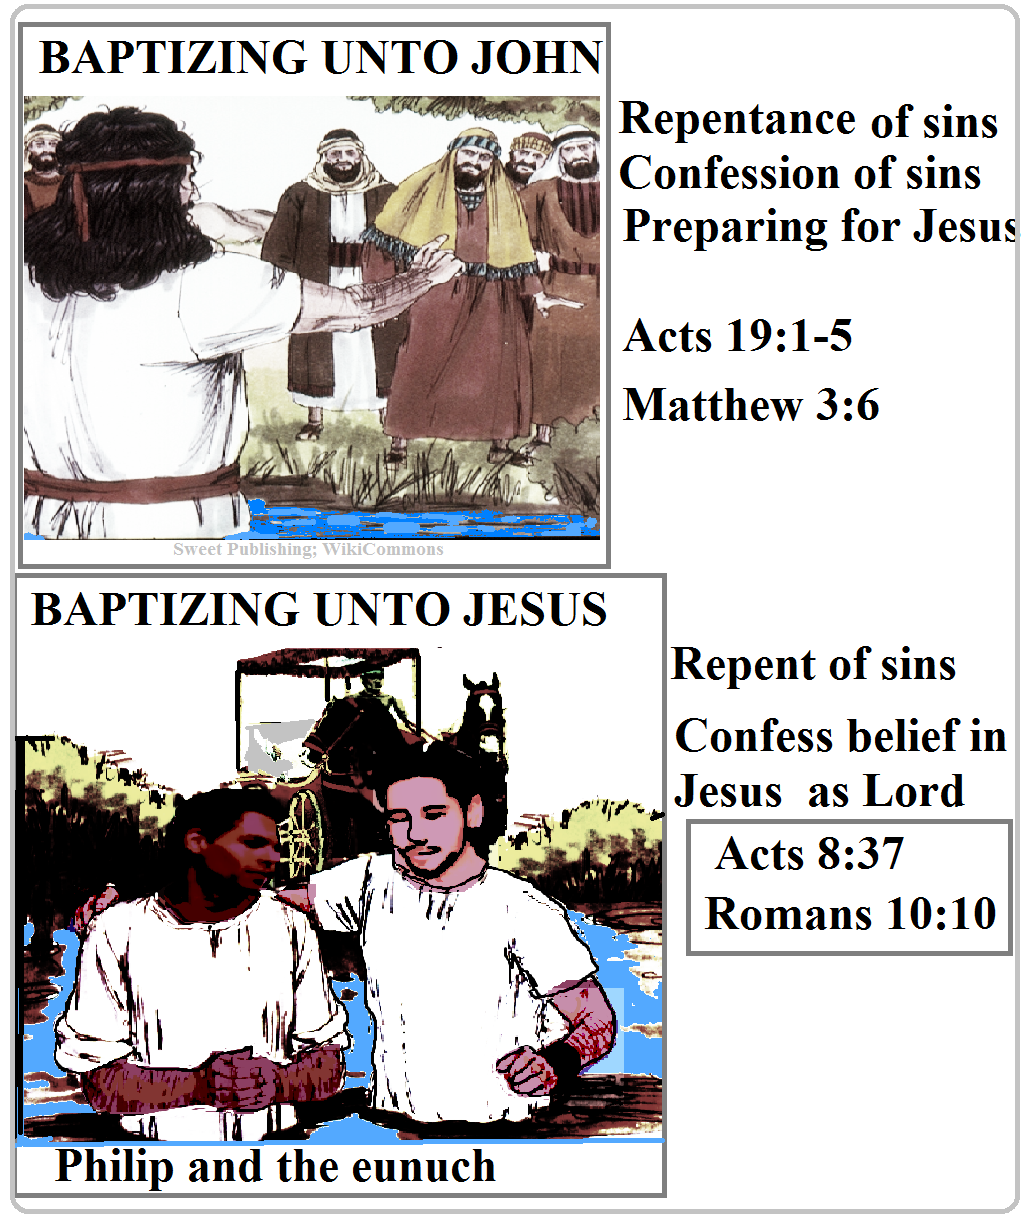 Contrast of purposes for John's and the actual kingdom's baptisms